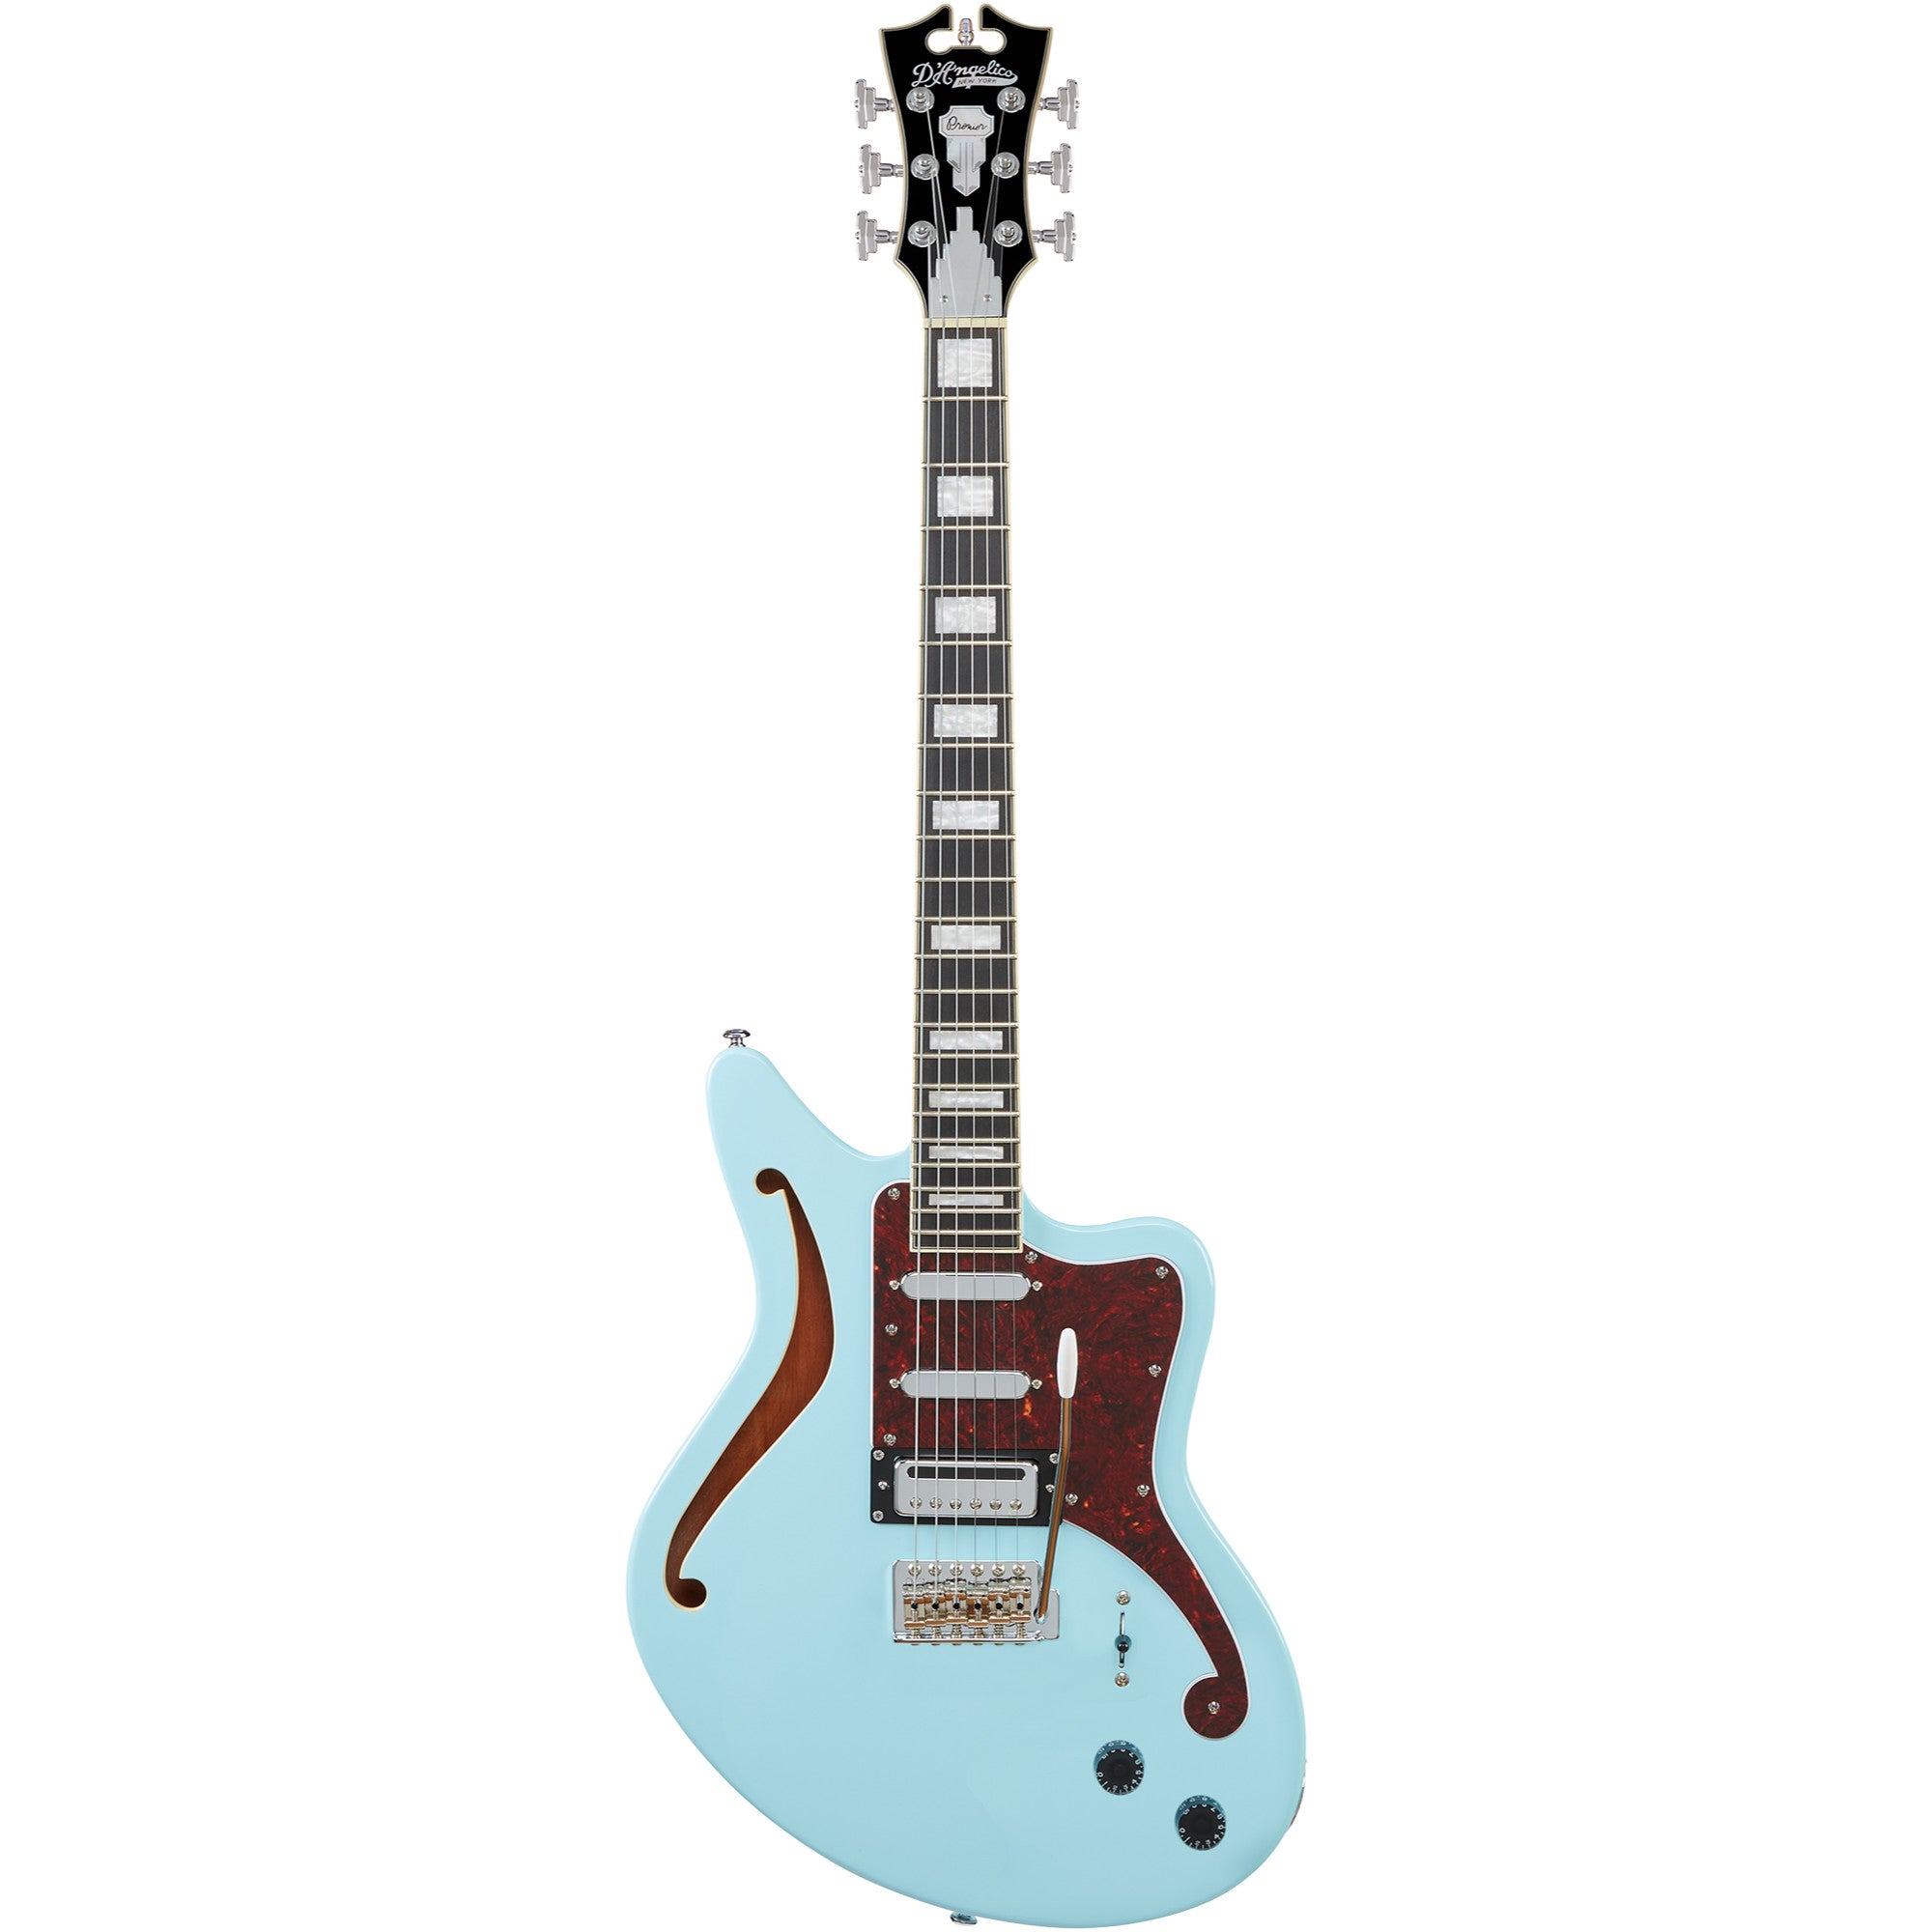 D'Angelico, D’Angelico Premier Bedford SH Offset Semi-Hollowbody Electric Guitar, Sky Blue